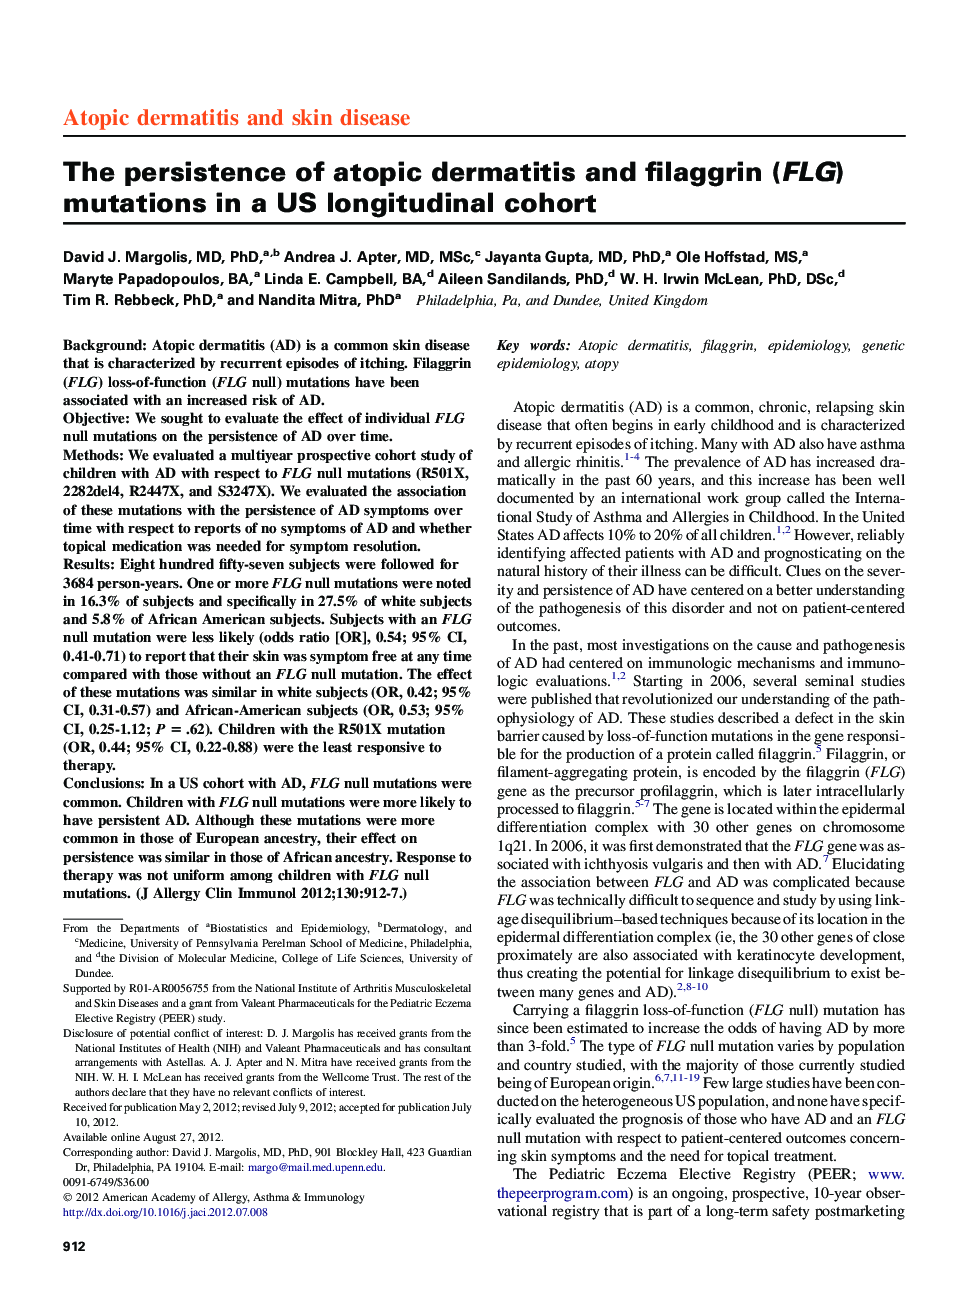 The persistence of atopic dermatitis and filaggrin (FLG) mutations in a US longitudinal cohort 